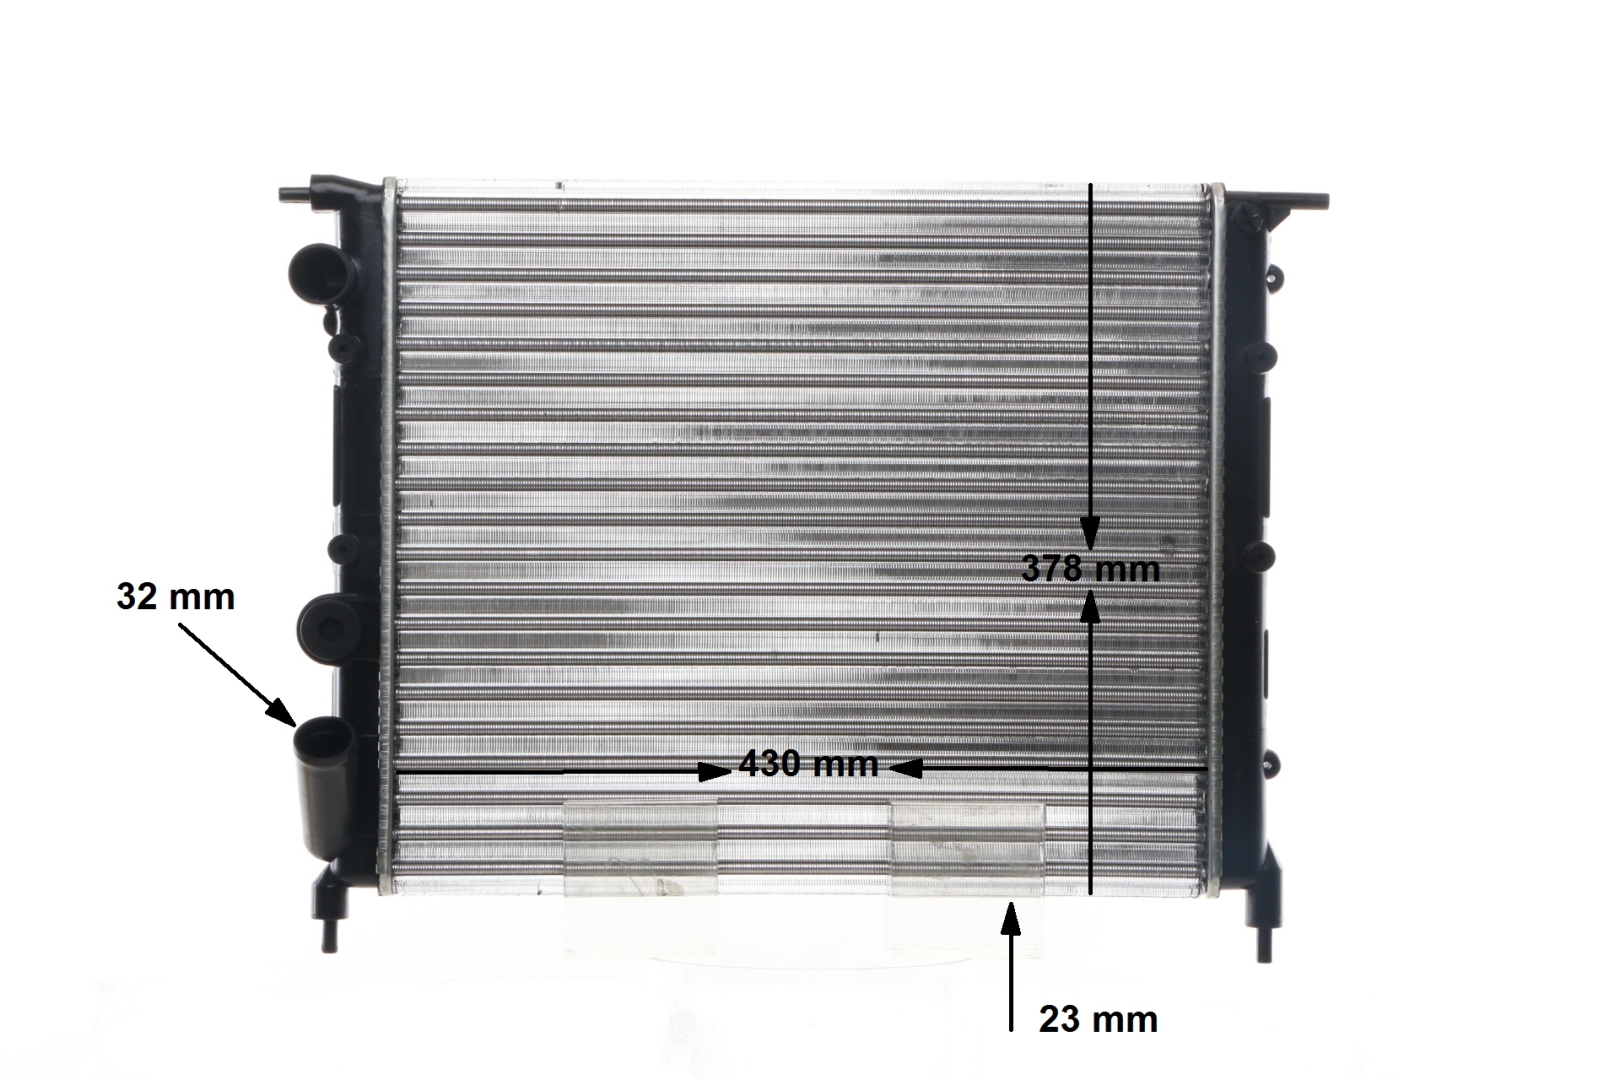 MAHLE ORIGINAL CR 476 000S Engine radiator for vehicles without air conditioning, 430 x 378 x 32 mm, with screw, Automatic Transmission, Manual Transmission, Mechanically jointed cooling fins